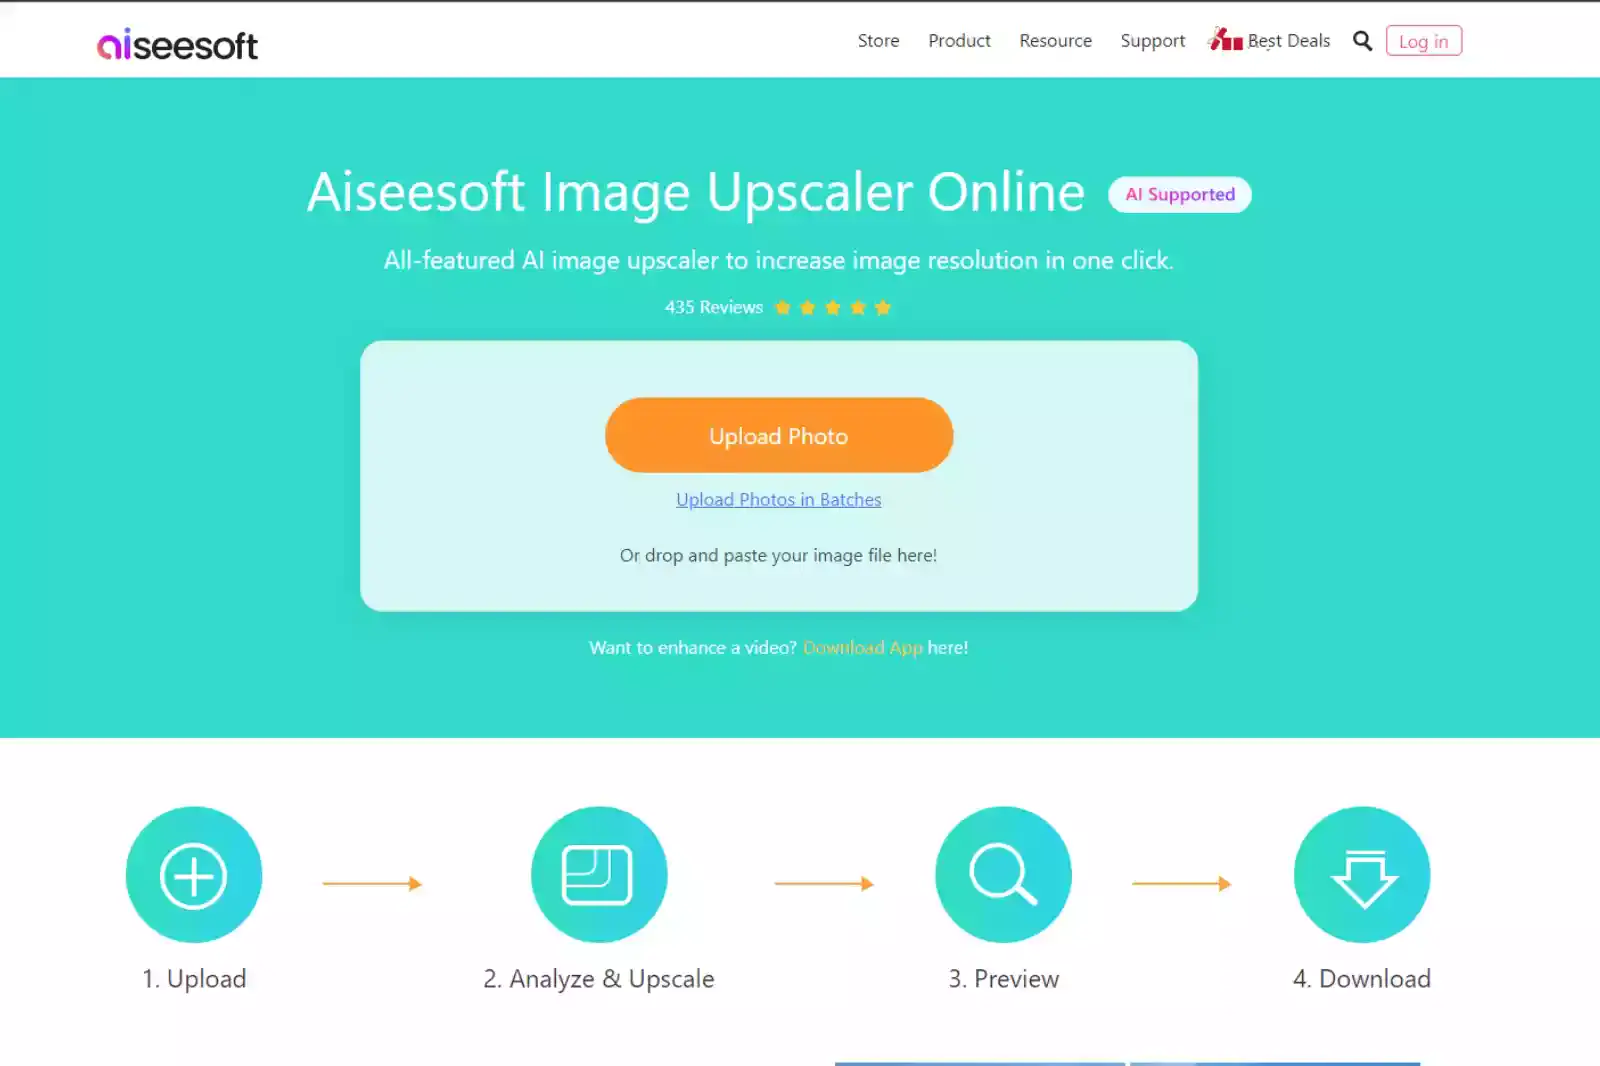 Home Page of Aiseesoft Image Upscaler Online